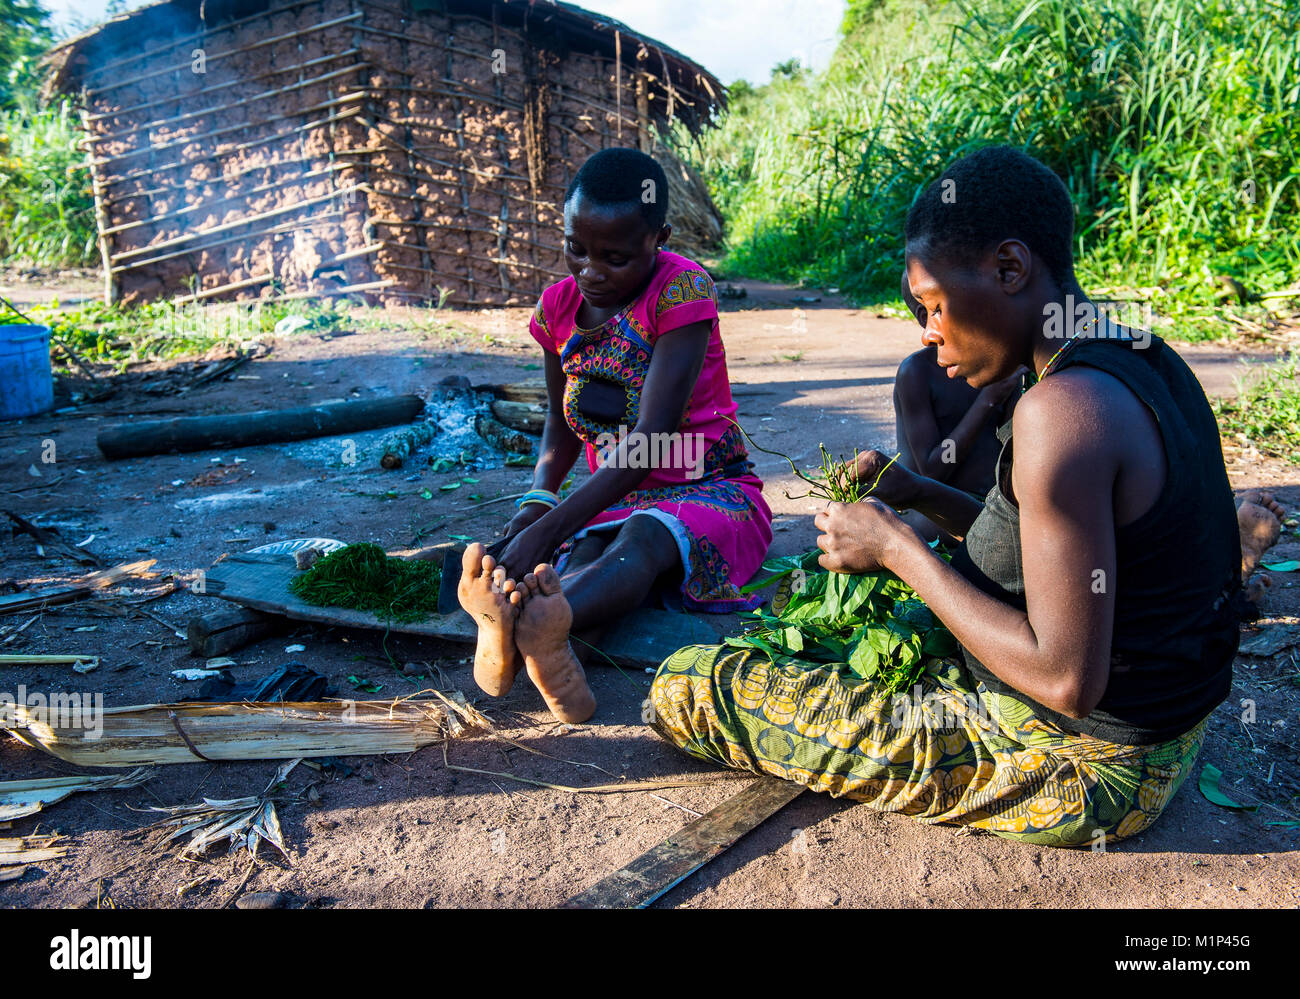 Baka pygmies preparing food in the Dzanga-Sangha Special Reserve, UNESCO World Heritage Site, Central African Republic, Africa Stock Photo